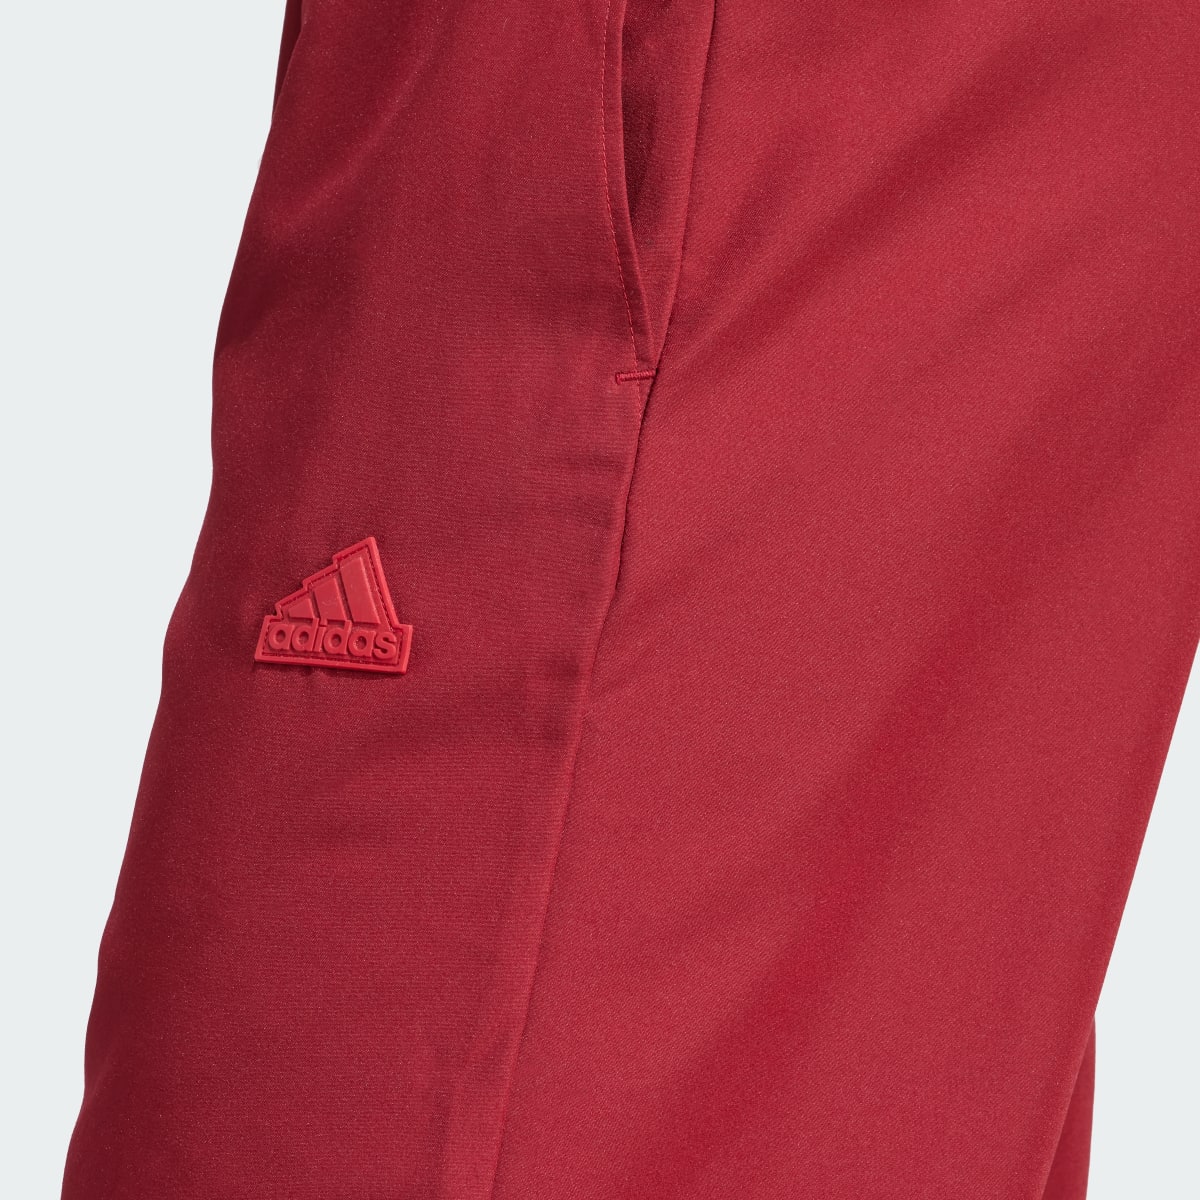 Adidas Manchester United Lifestyler Woven Pants. 7